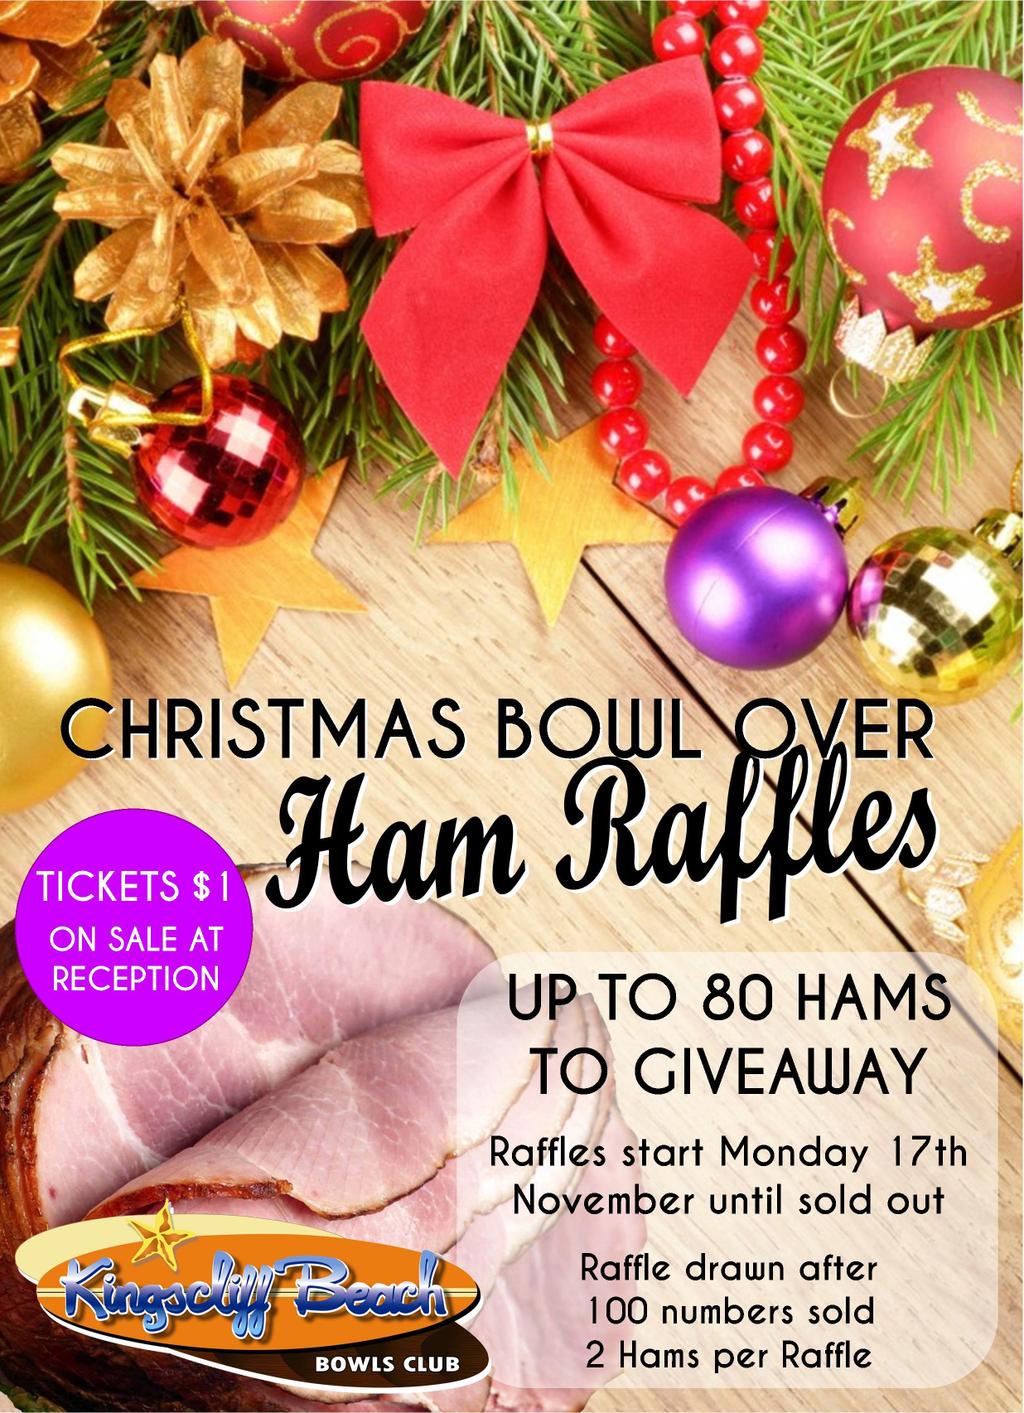 What s On Christmas Bowl Over Ham Raffles An annual tradition here at the Kingscliff Beach Bowls Club, our Christmas Bowl Over Ham Raffles will kick off on Monday, 17 November.